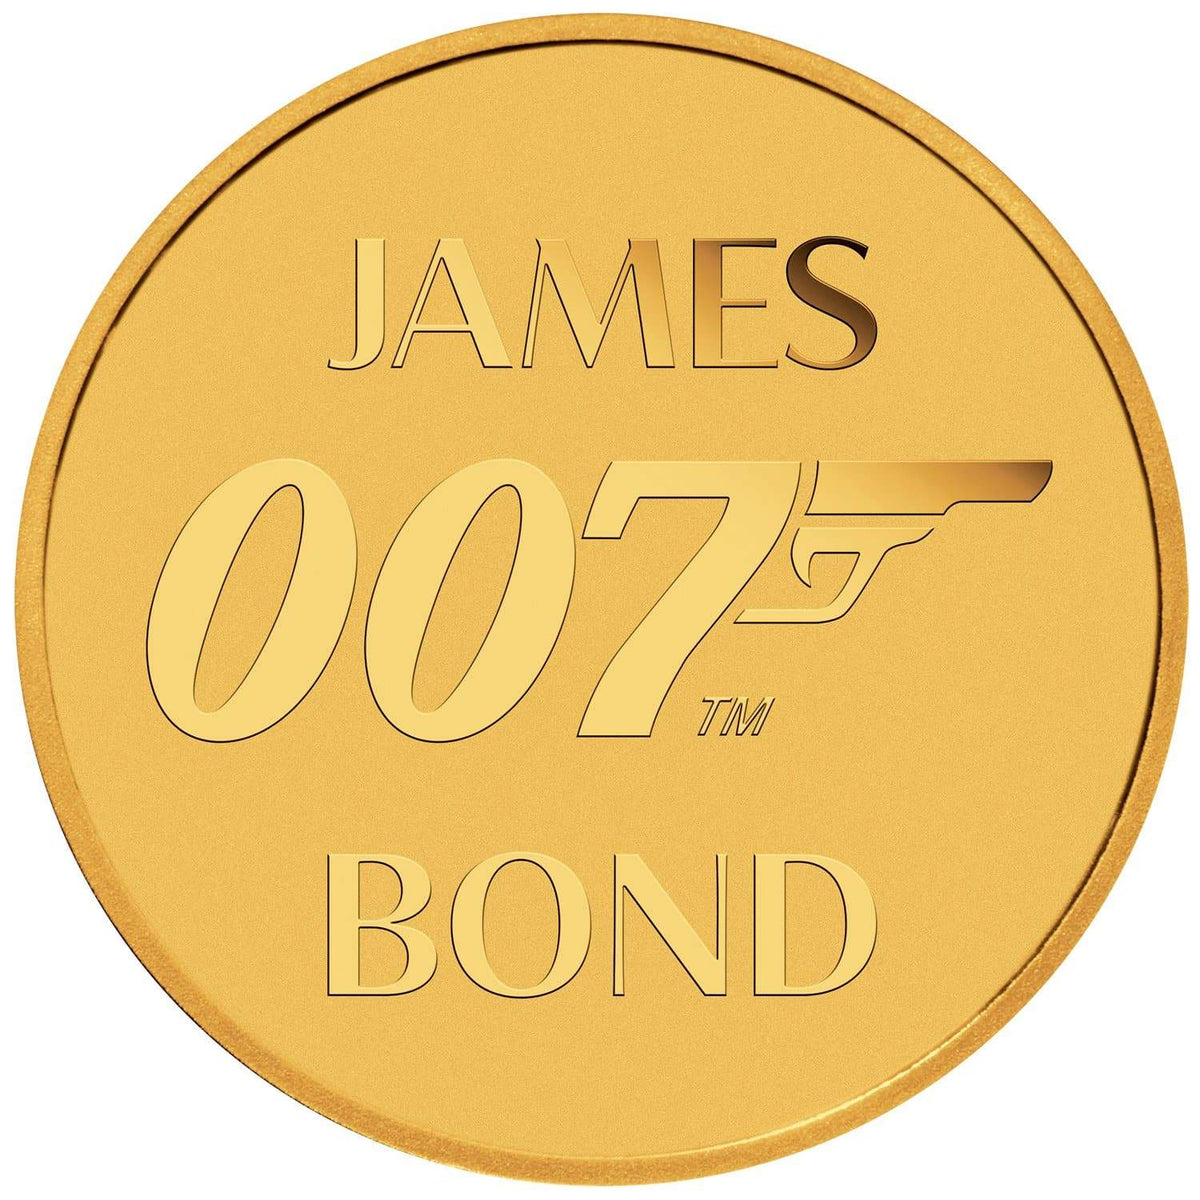 James Bond 0.5g 2021 Gold Coin In Presentation Card - By The Perth Mint Coins PERTH MINT 